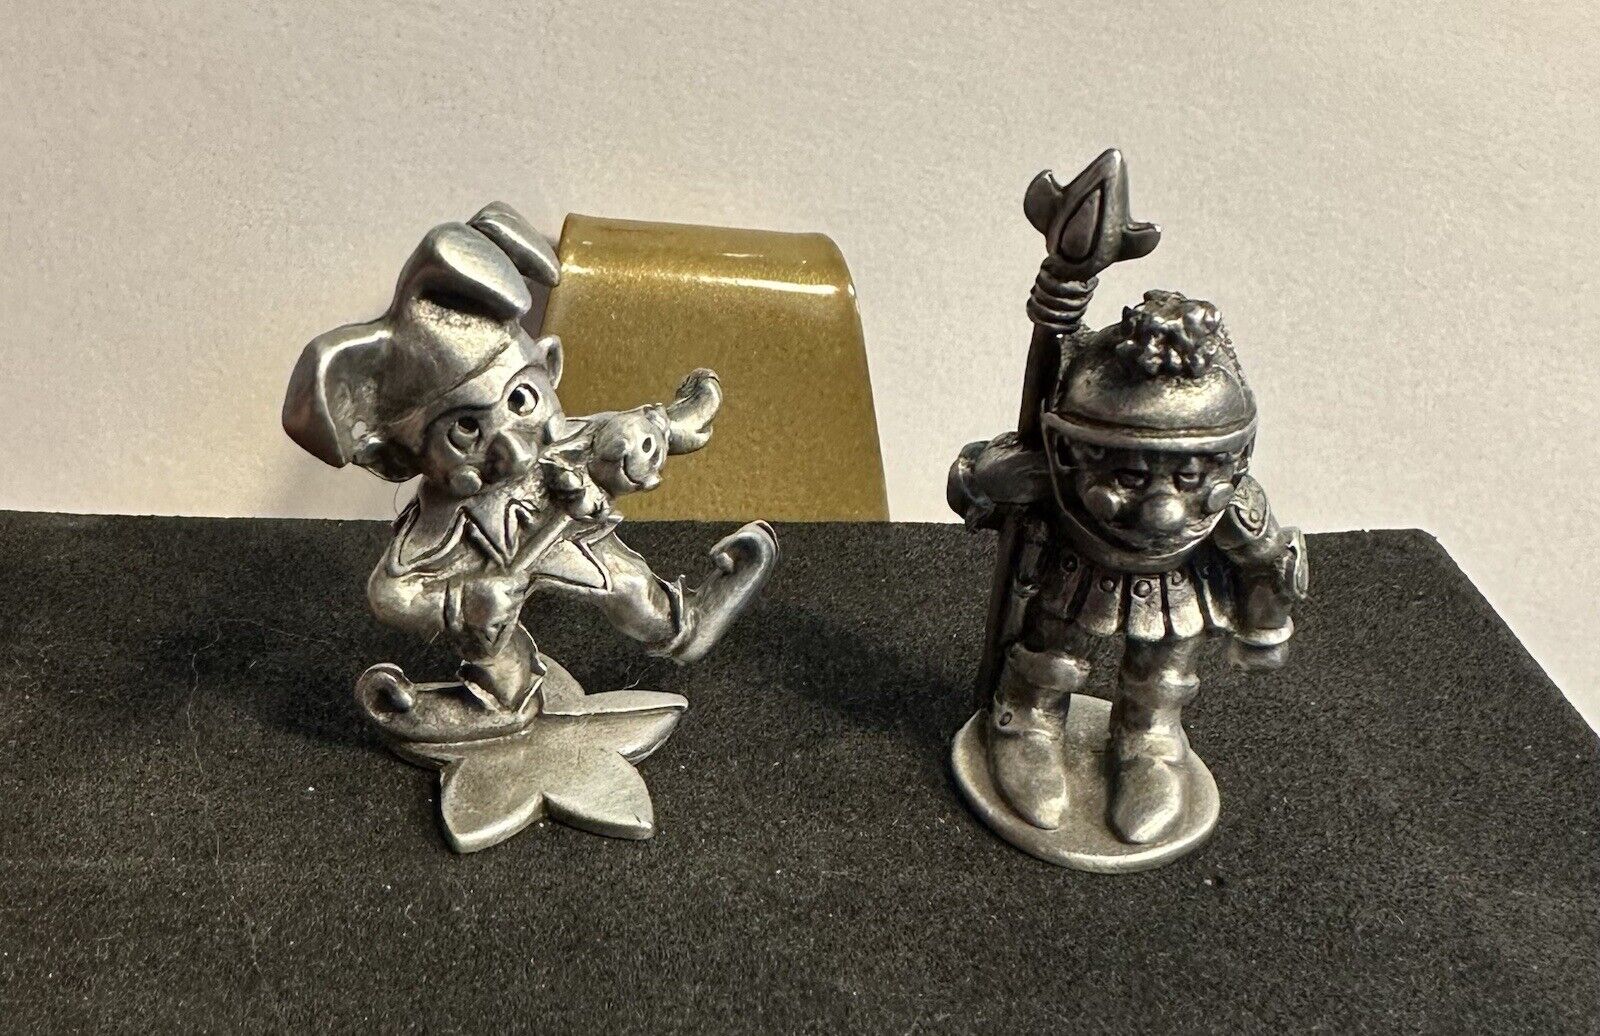 Hudson Fine Pewter 1984 Figurines # 3151 And 3152 Made in USA Lot Of 2